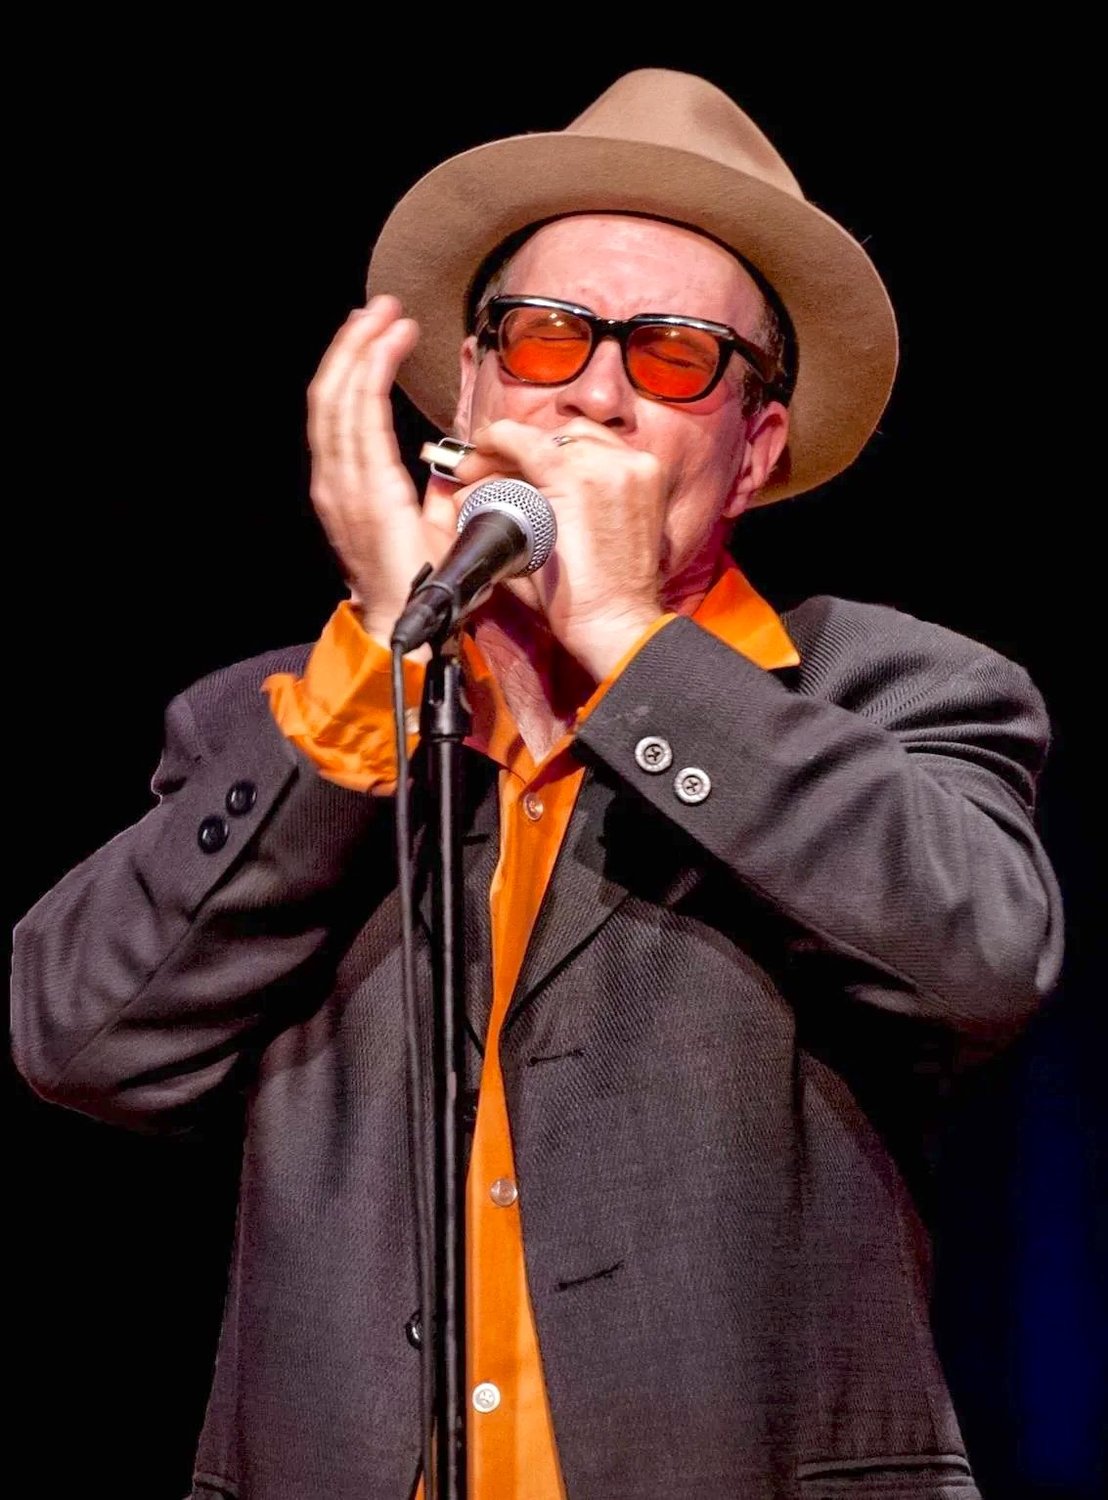 Blues legend Mark Hummel and his band, the Blues Survivors, will perform at 7 p.m. June 8 at the Roselawn in New York Mills.